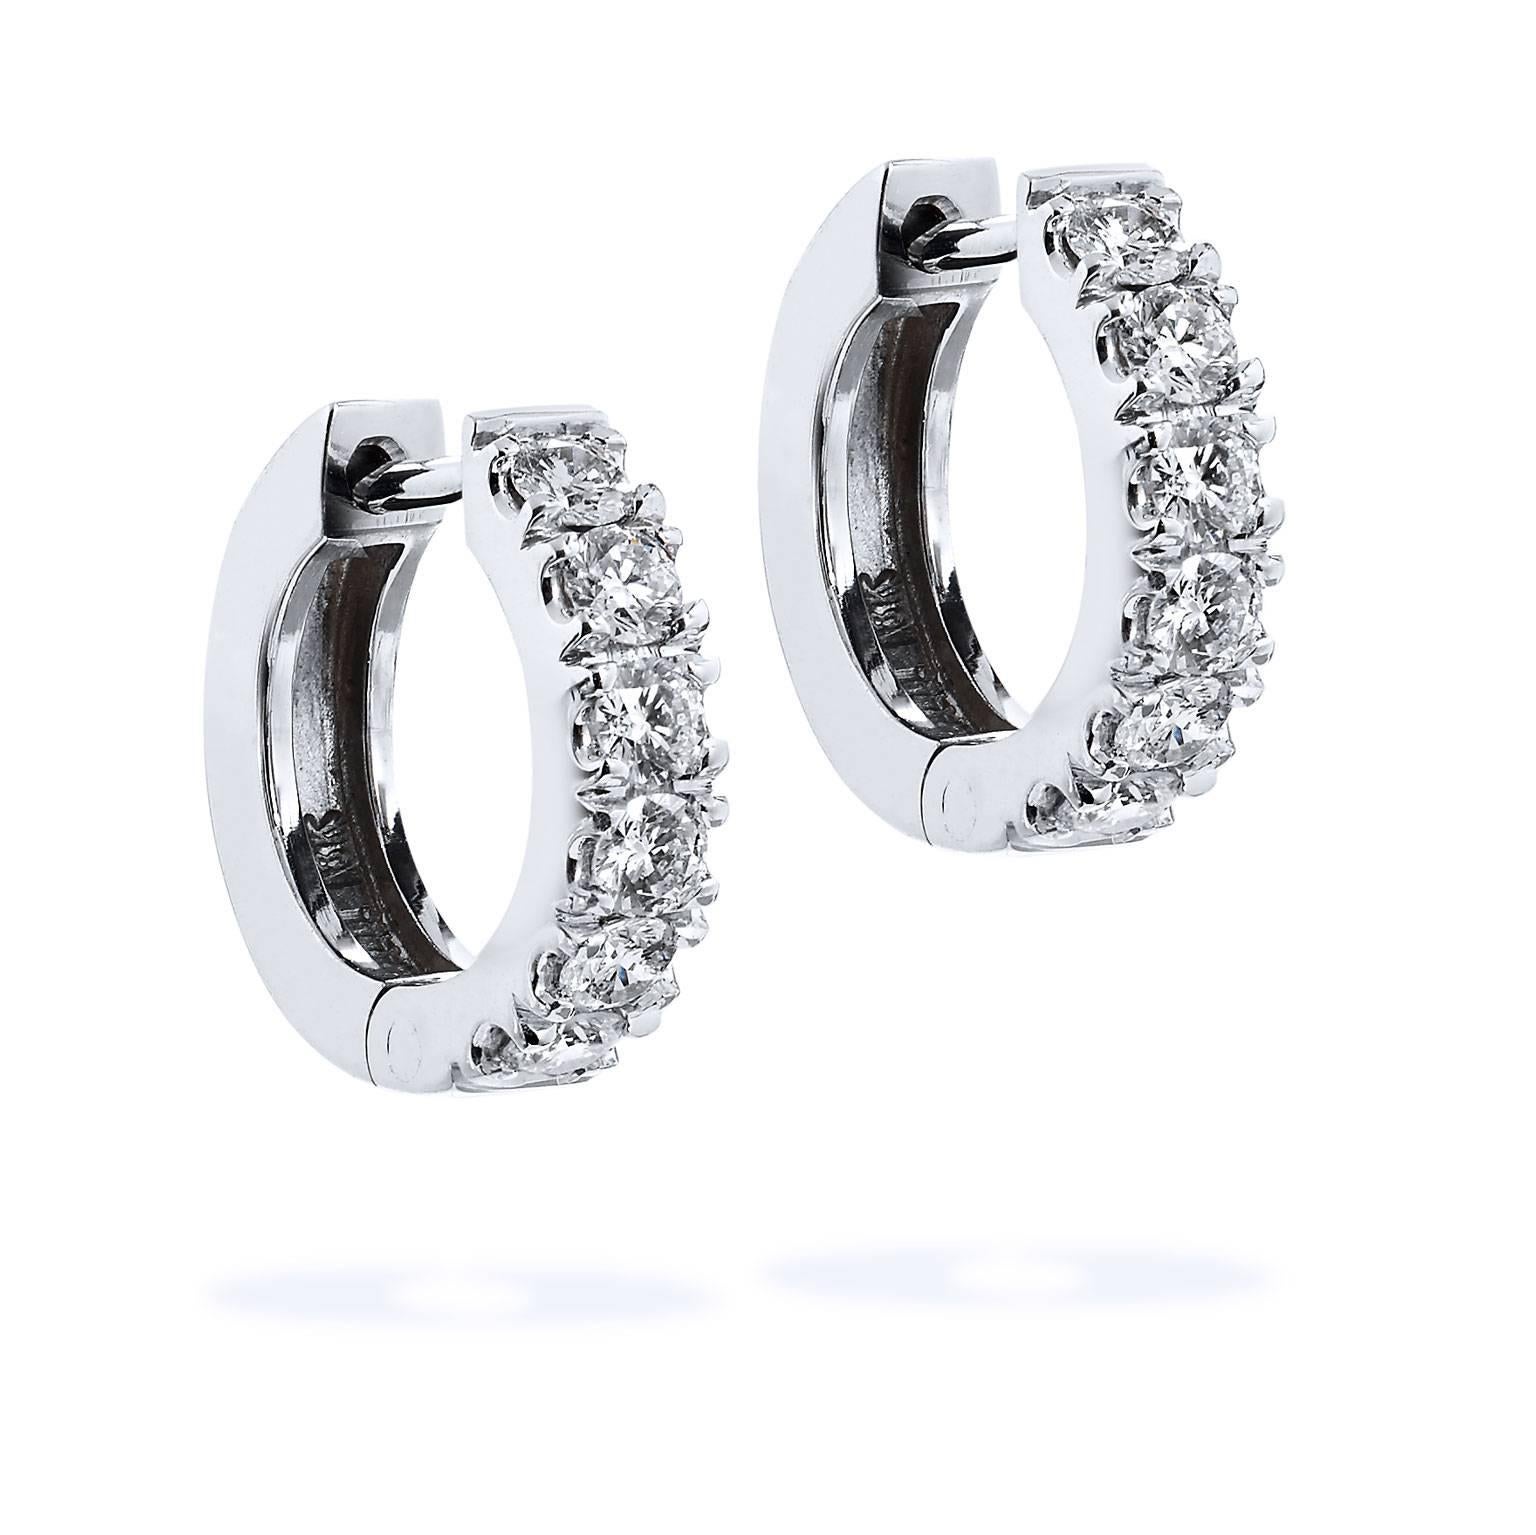 18 karat white gold acts as a backdrop to a beautiful sea of 0.50 carat of diamond prong set (F/G/VS2/SI1) in these handmade H and H classic huggy hoop earrings measuring 13 mm in diameter and 2.95 mm in width.